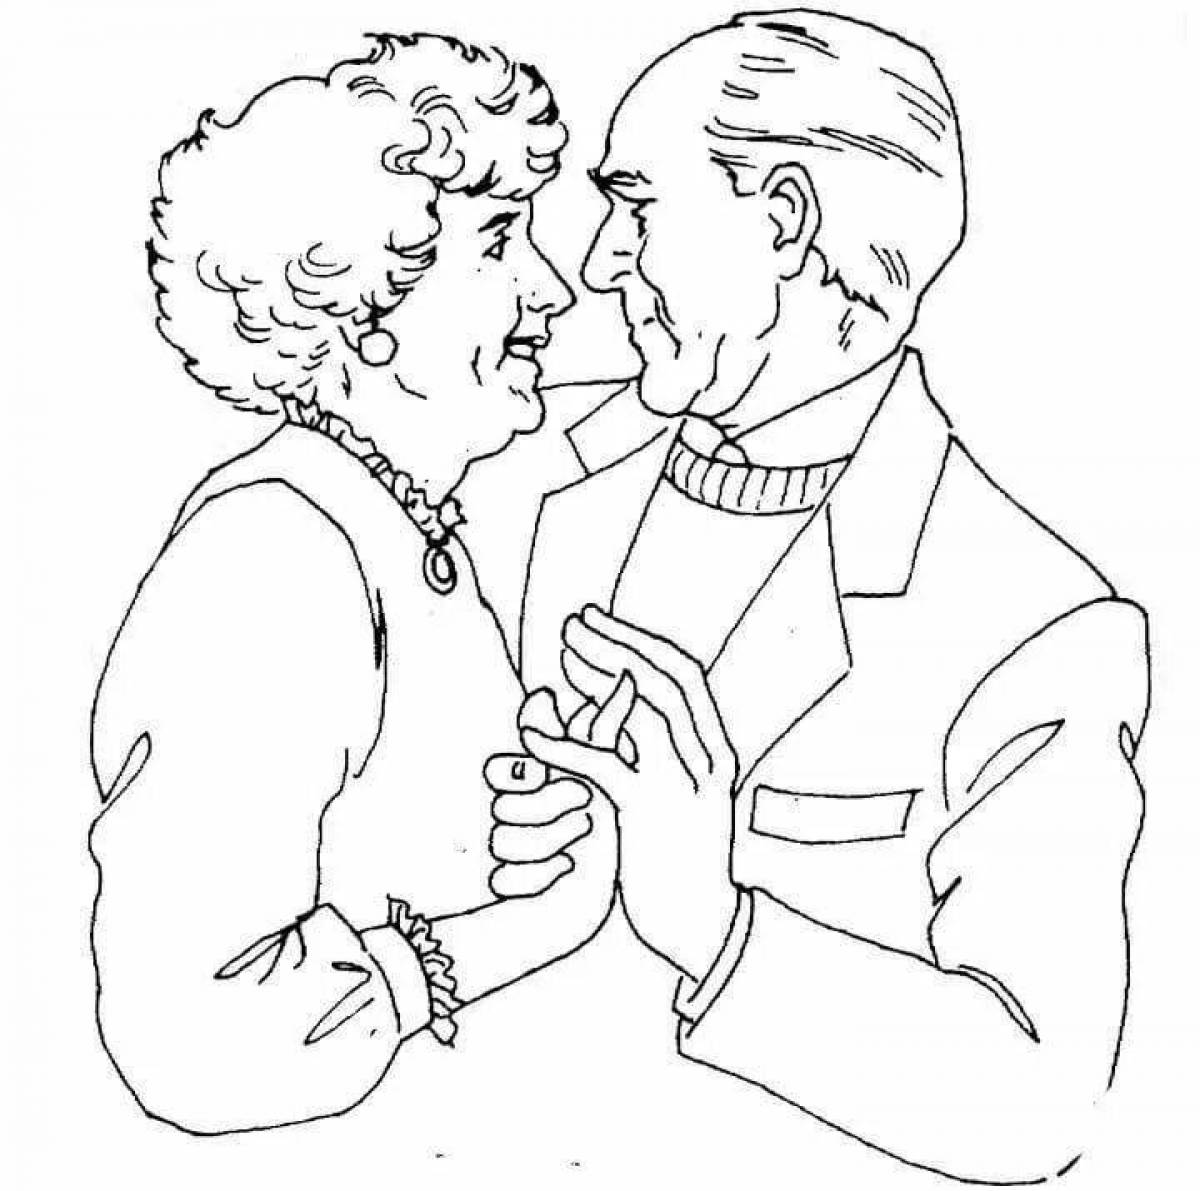 Comforting coloring book for the elderly